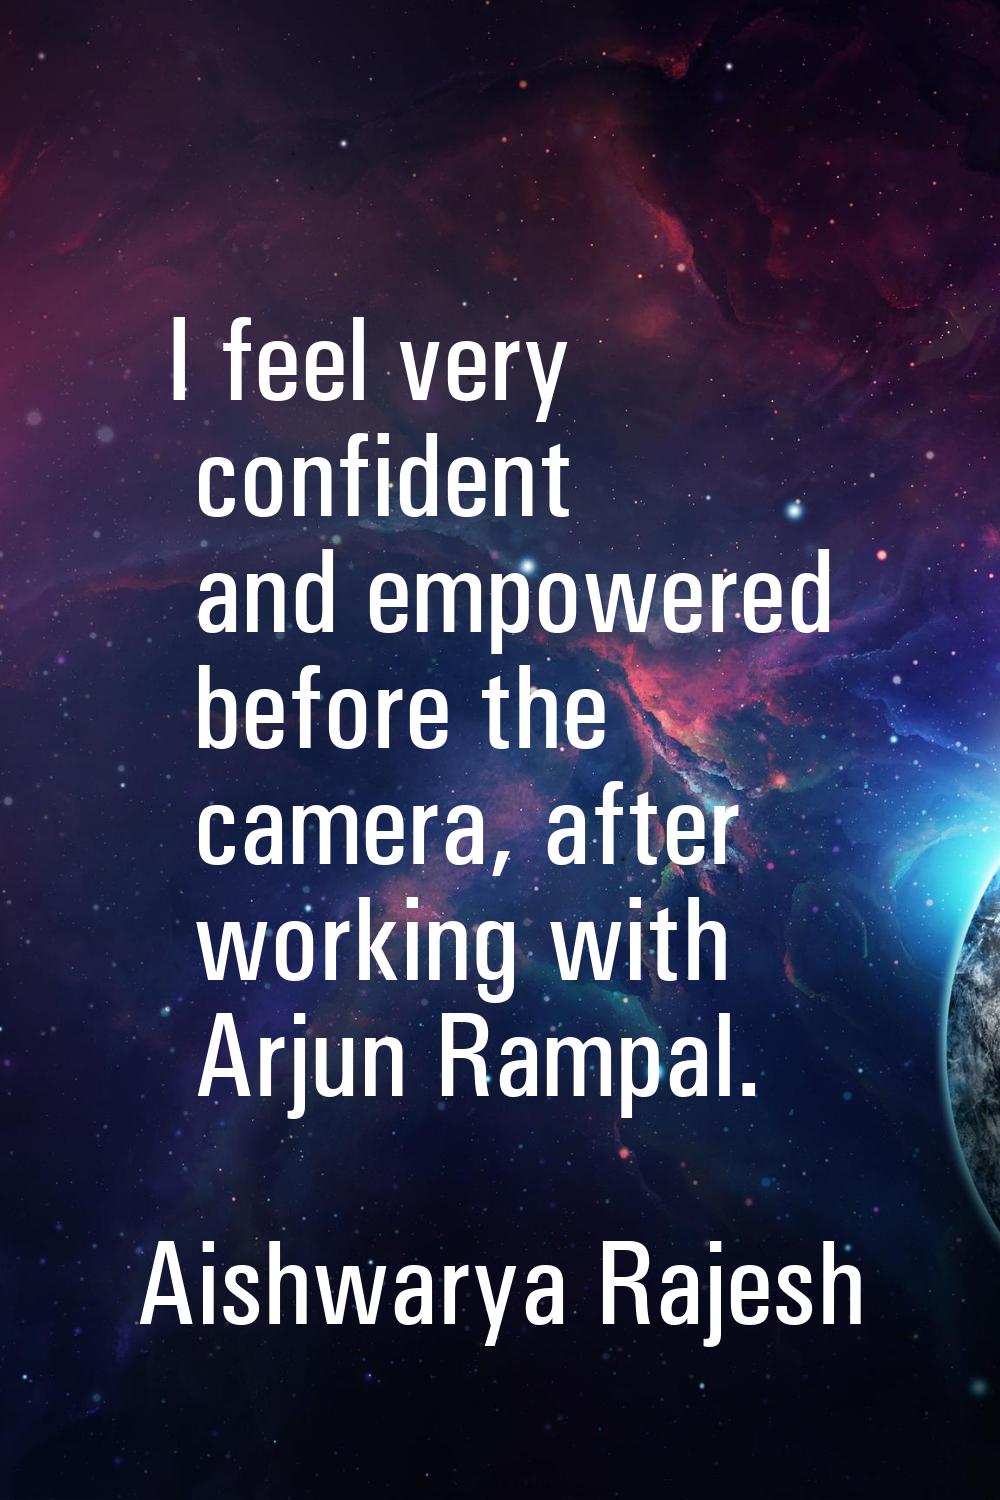 I feel very confident and empowered before the camera, after working with Arjun Rampal.